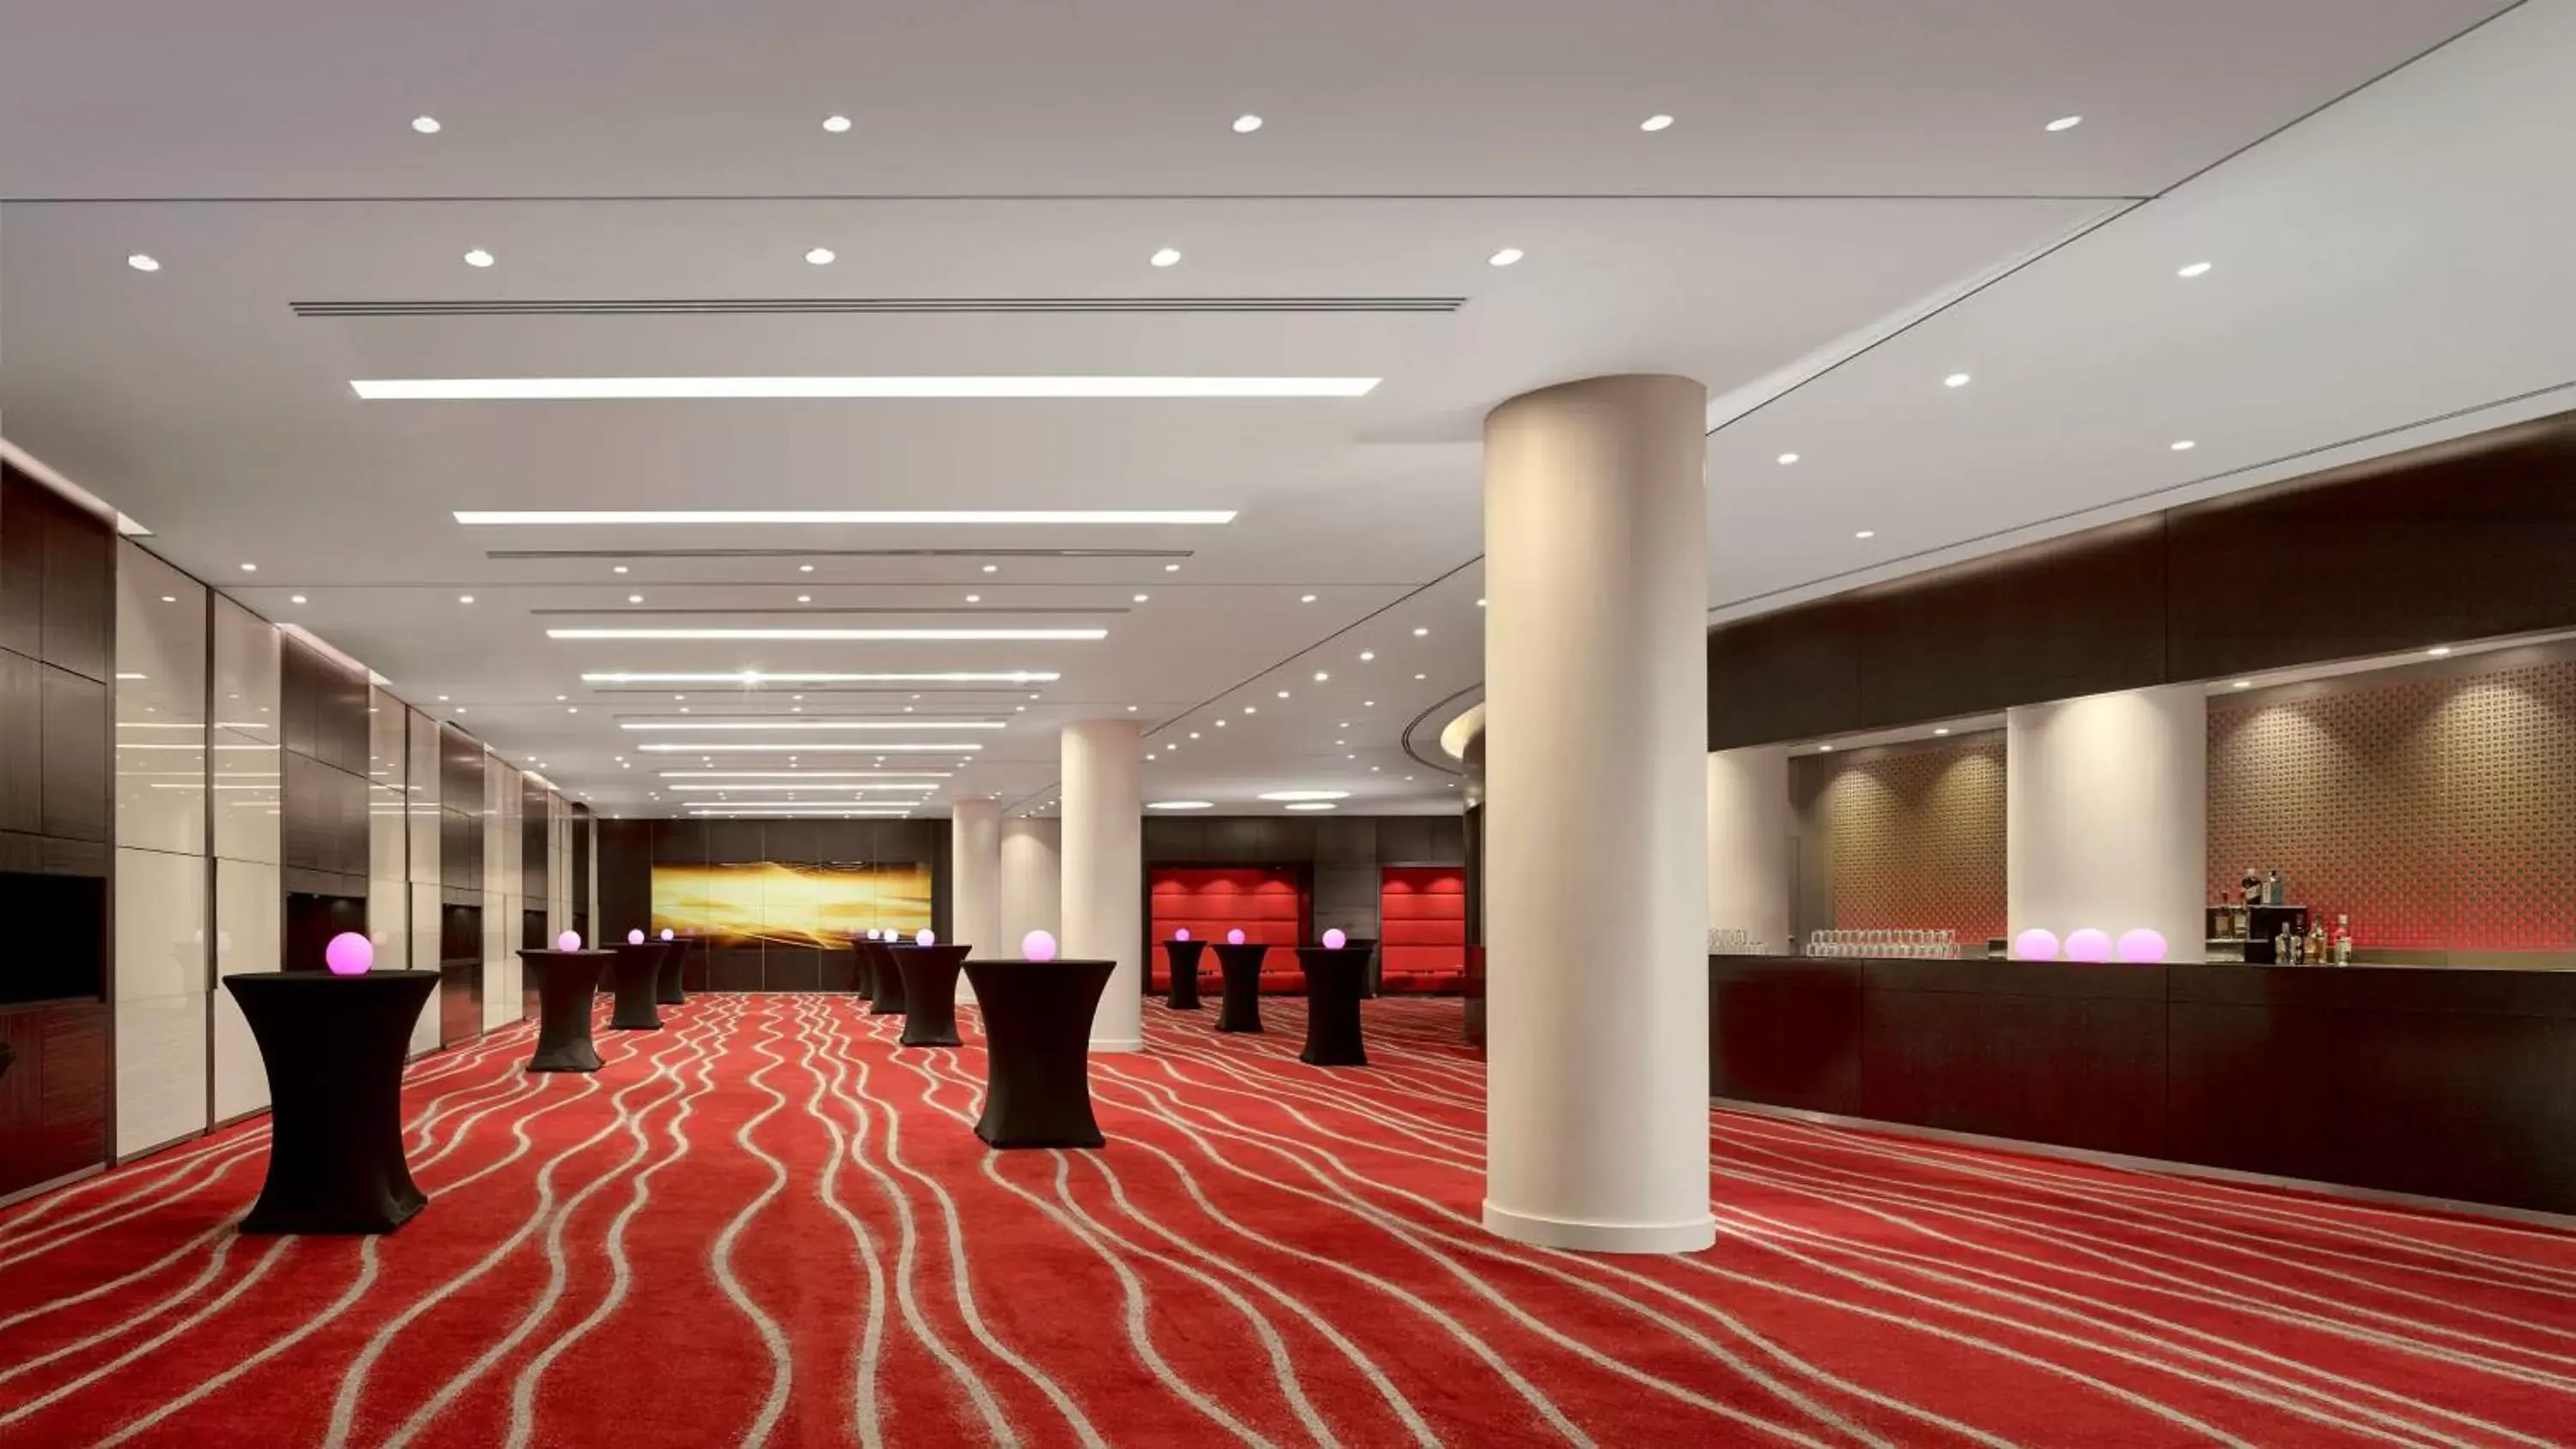 On site, Banquet Facilities in Park Plaza Westminster Bridge London